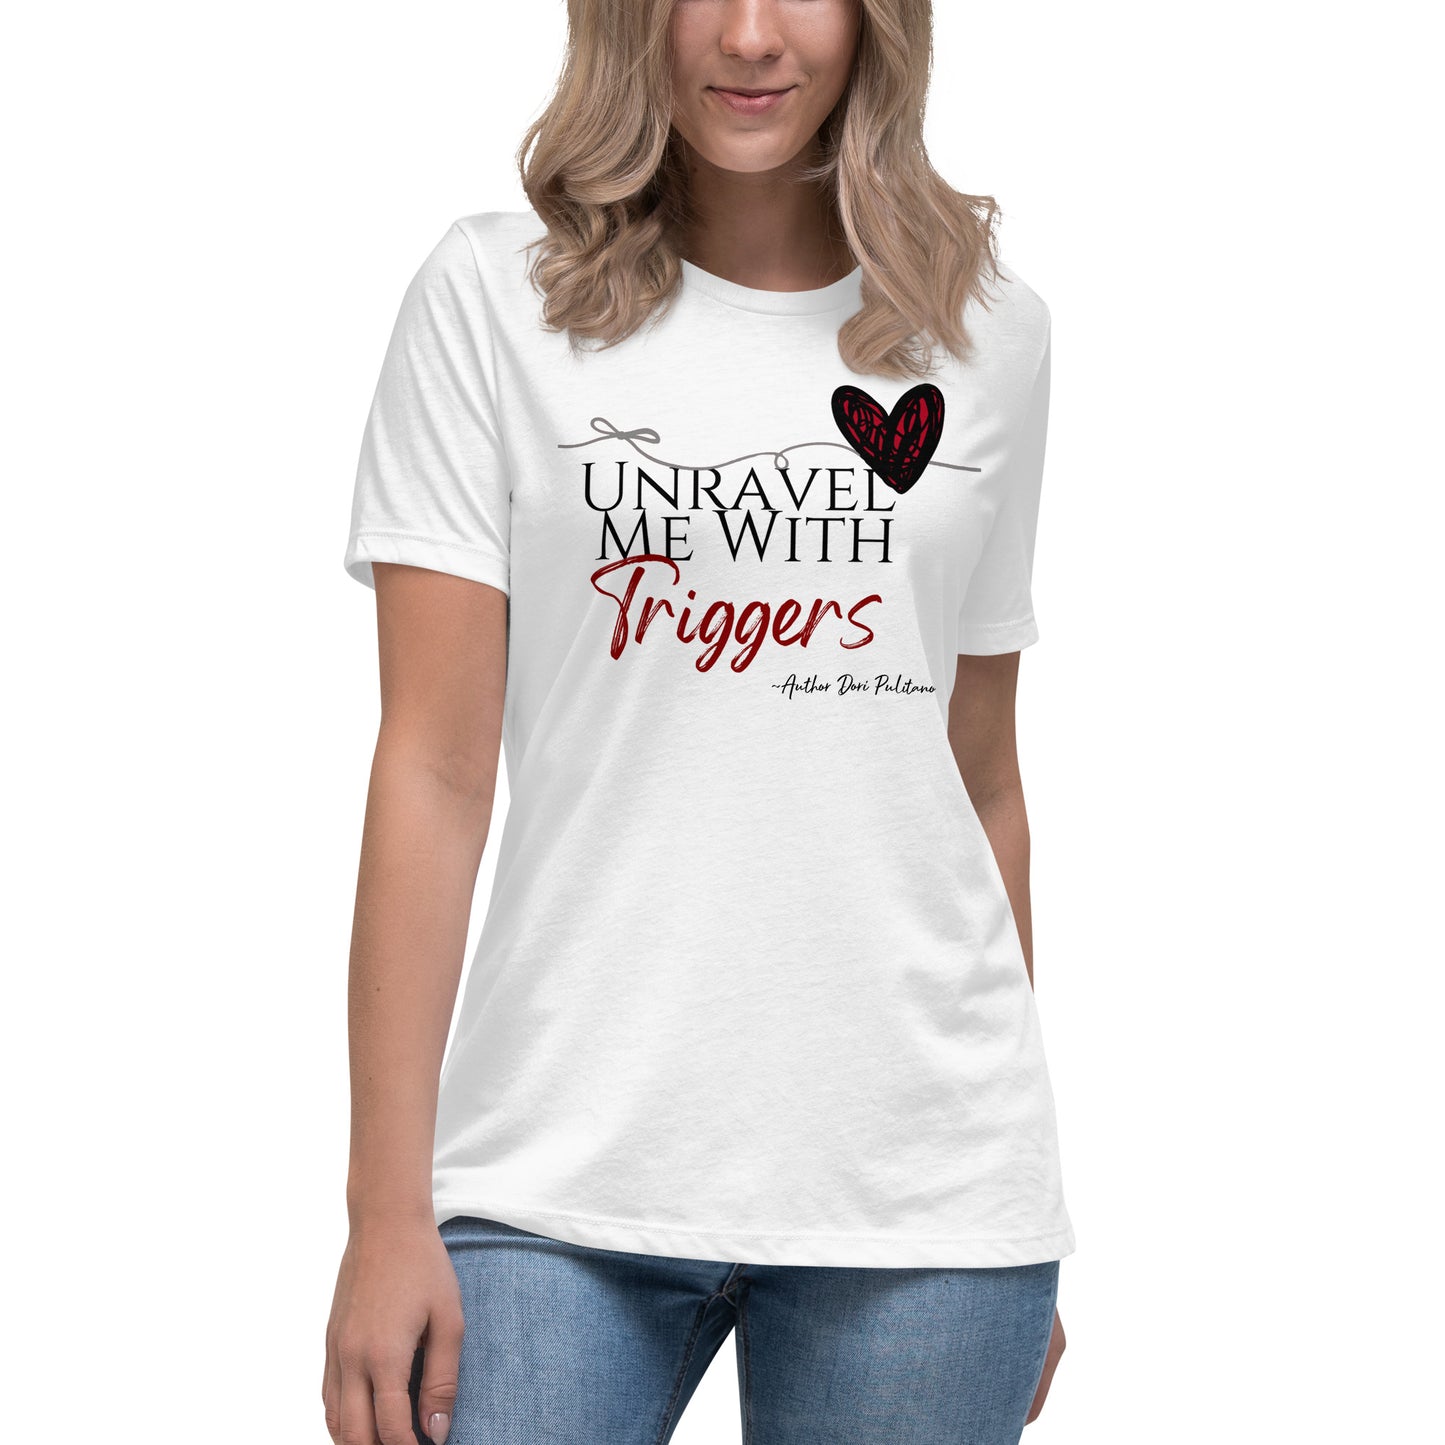 Unravel me with triggers Women's Relaxed T-Shirt